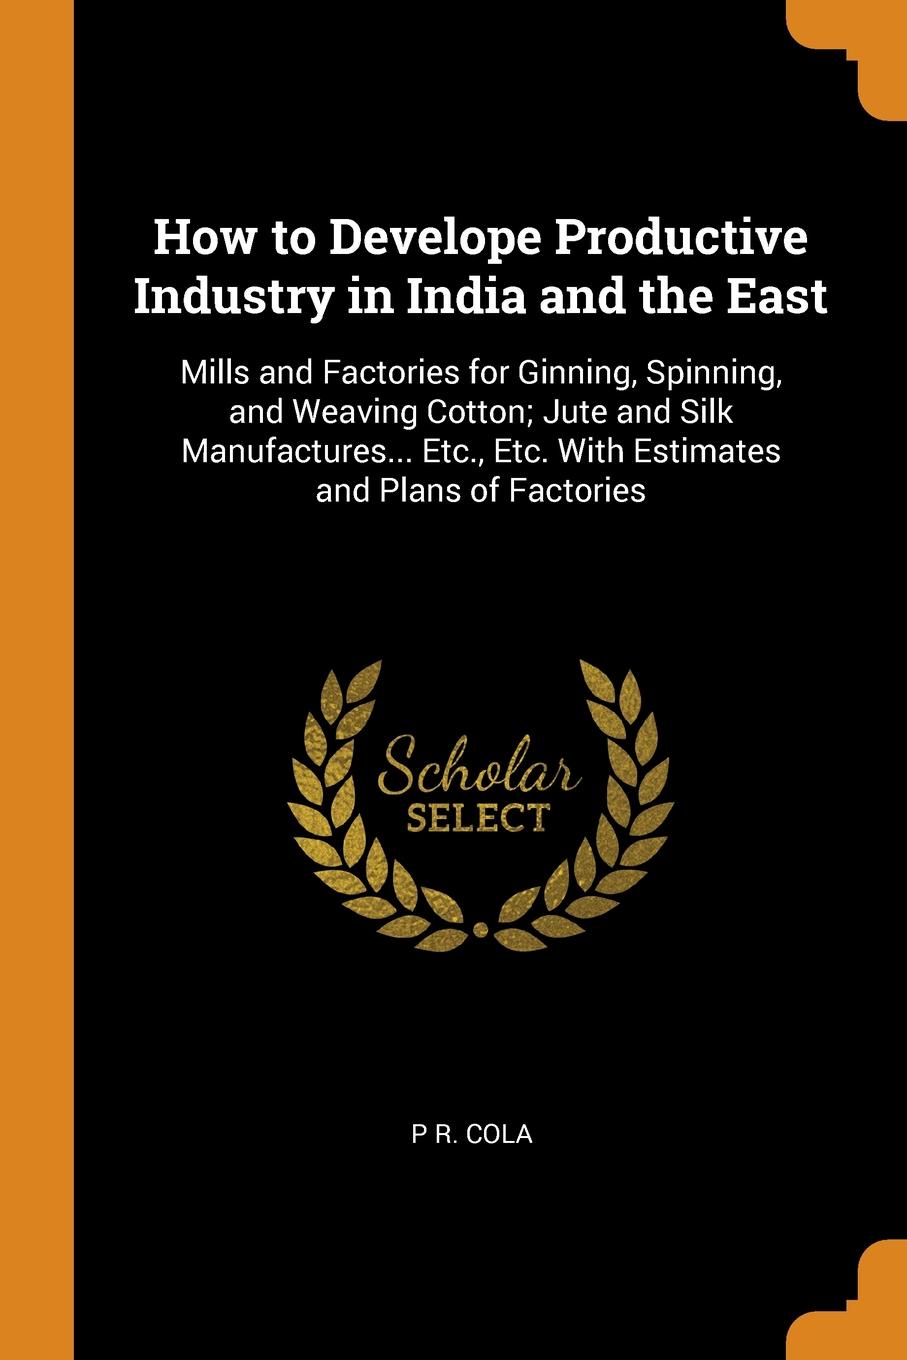 фото How to Develope Productive Industry in India and the East. Mills and Factories for Ginning, Spinning, and Weaving Cotton; Jute and Silk Manufactures... Etc., Etc. With Estimates and Plans of Factories